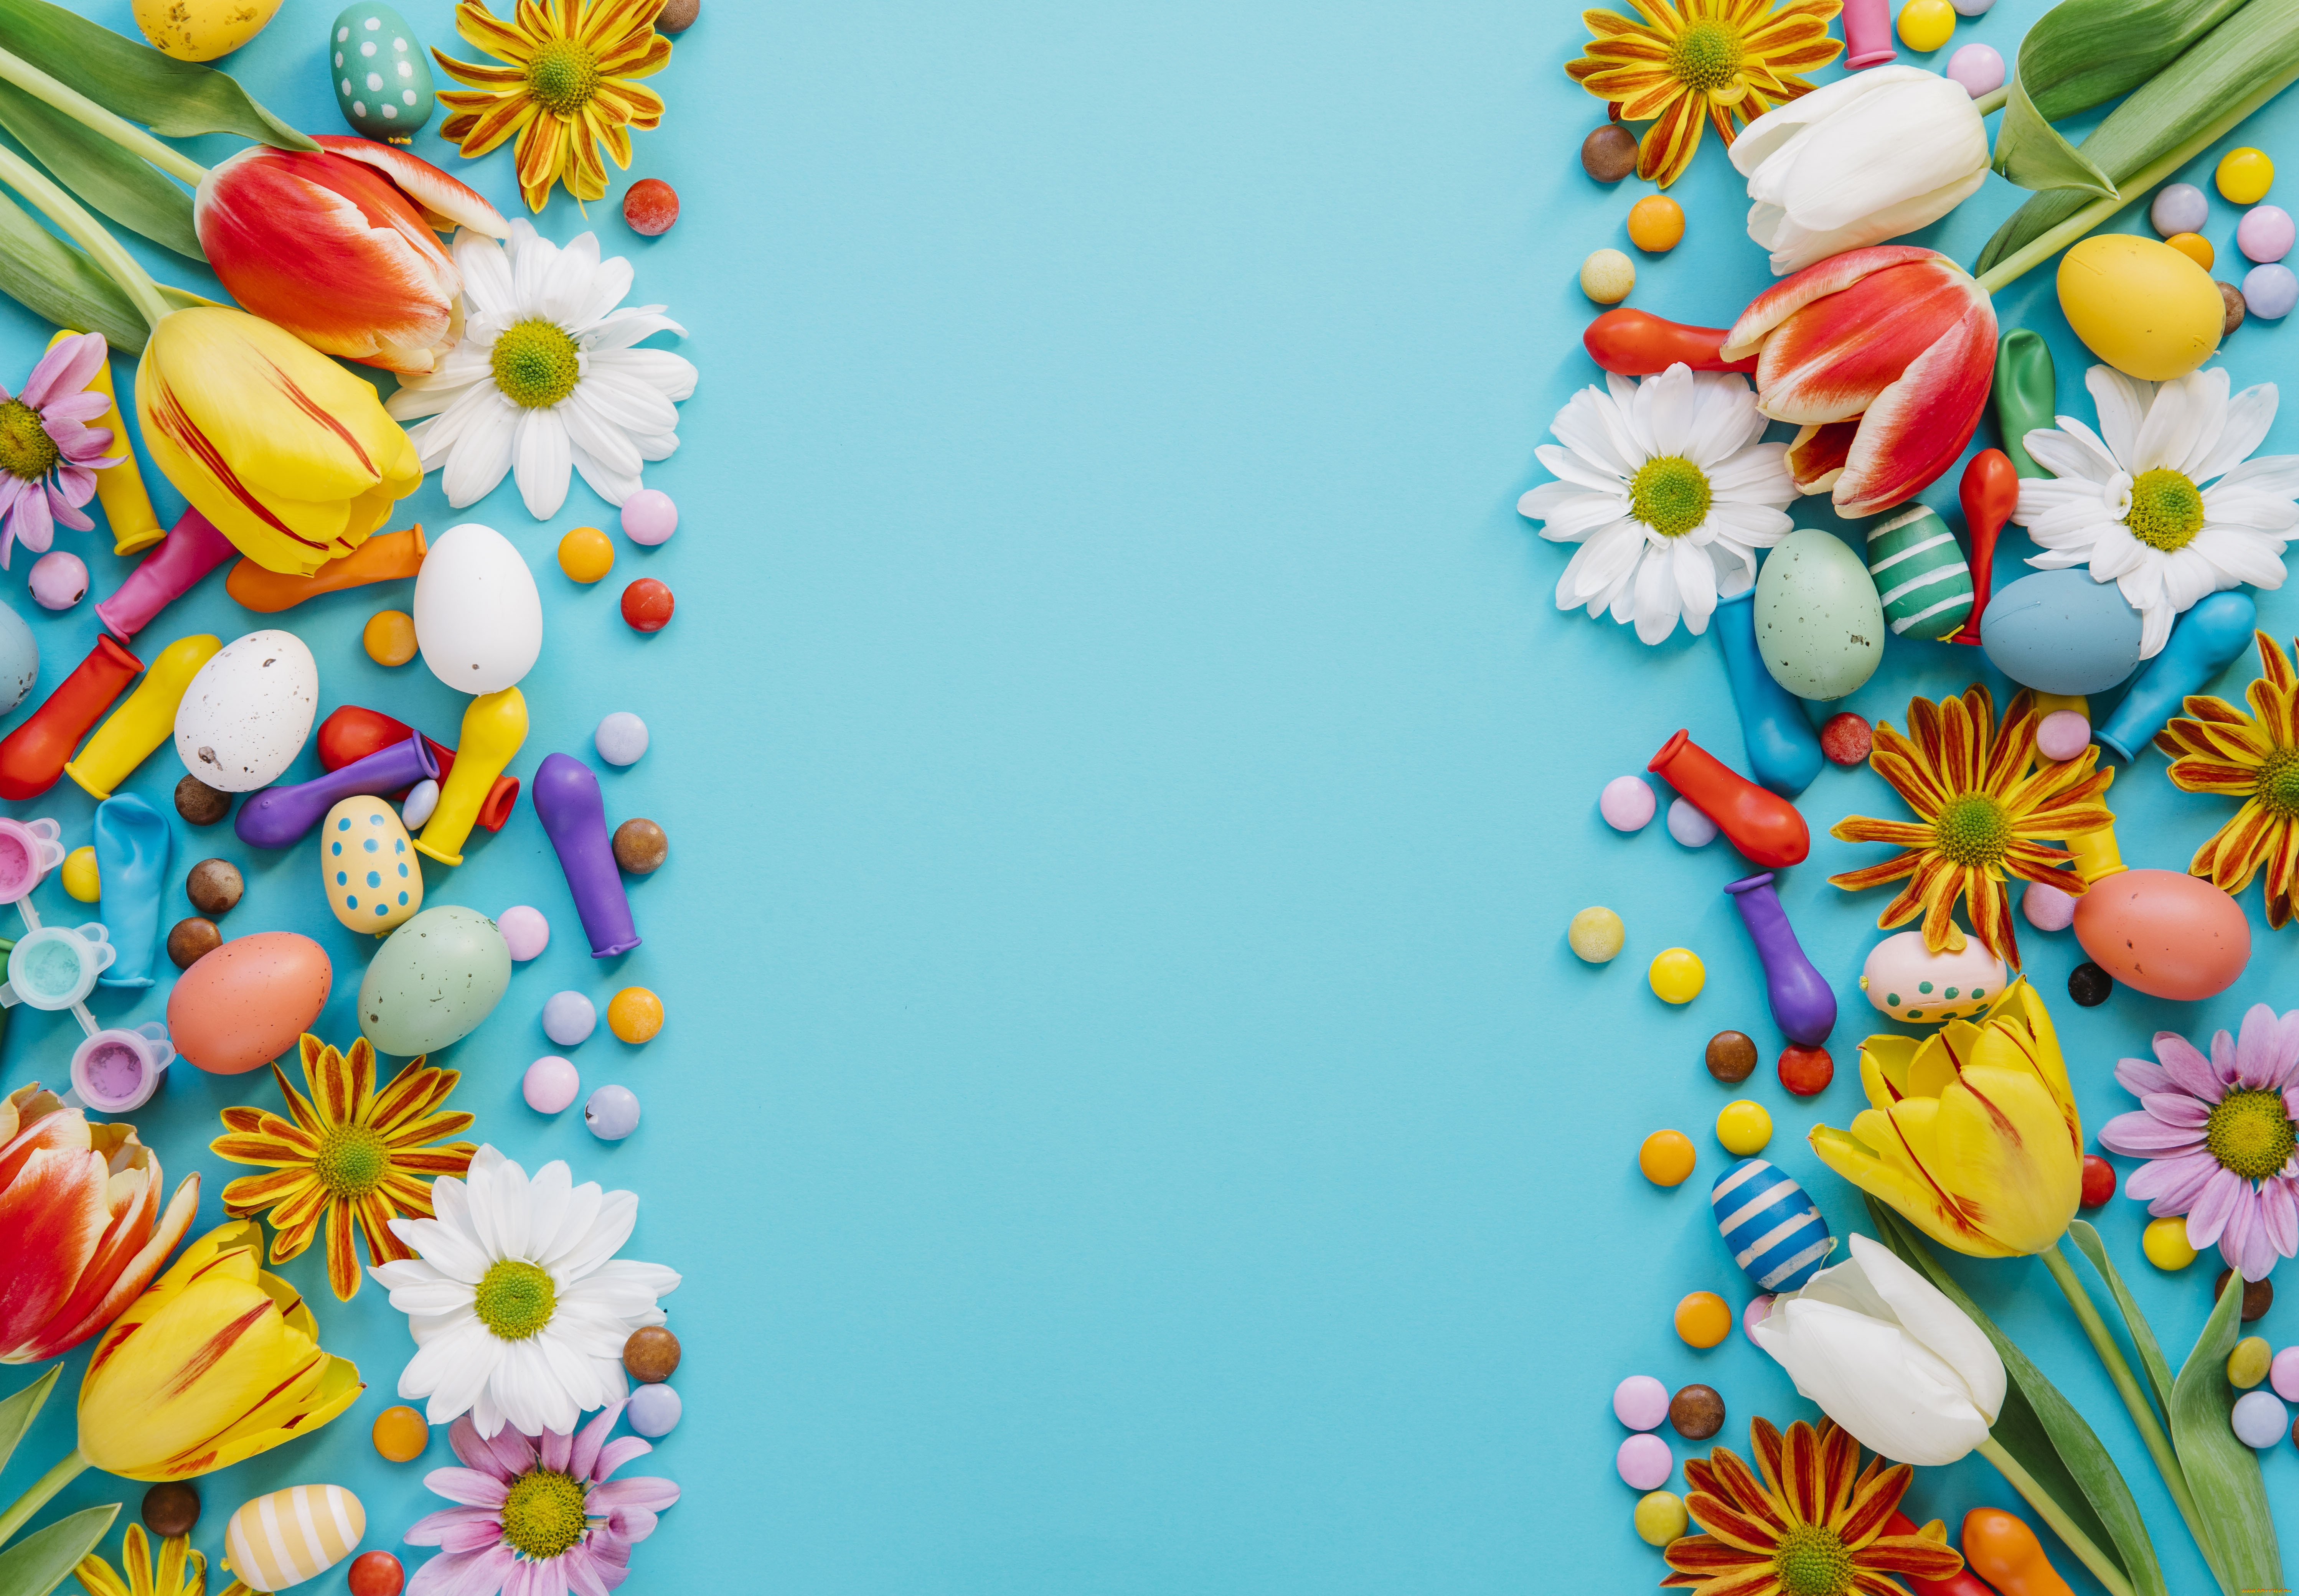 , , , , flowers, easter, blue, candies, colorful